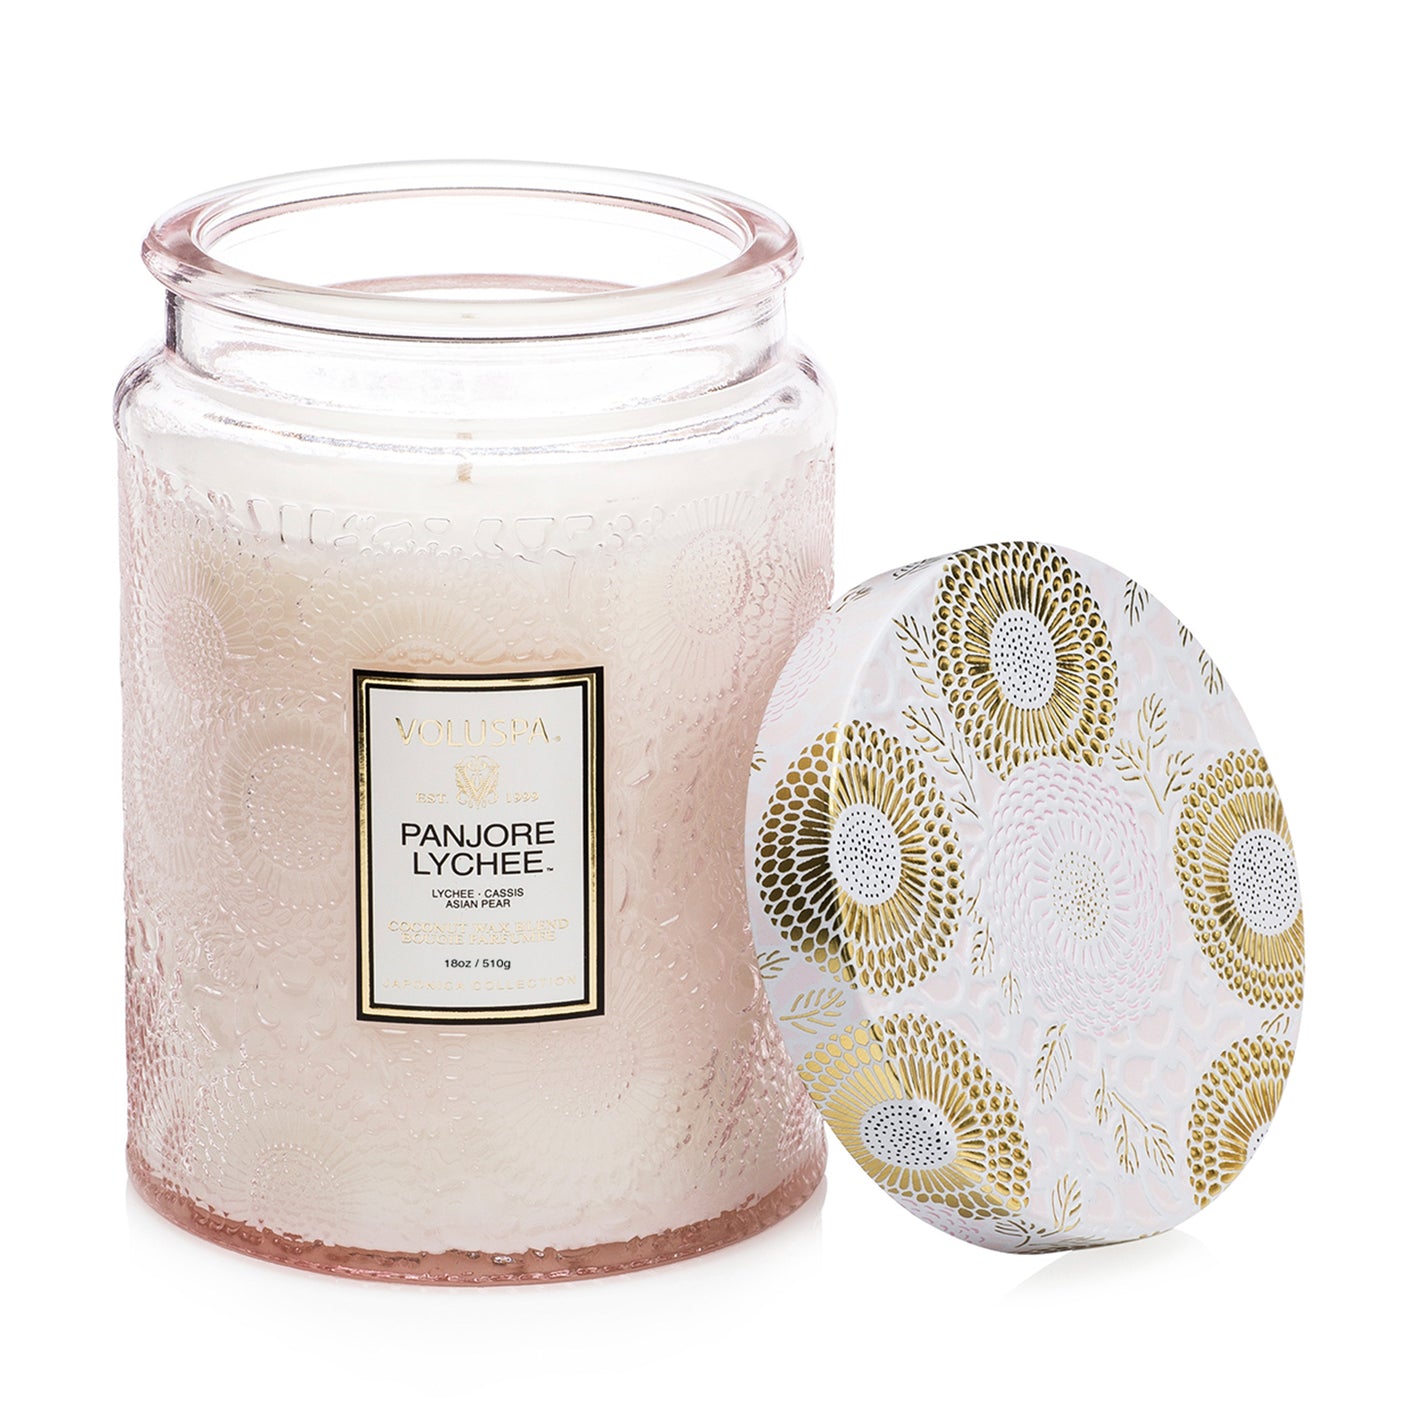 VOLUSPA Panjore Lychee 100hr Candle